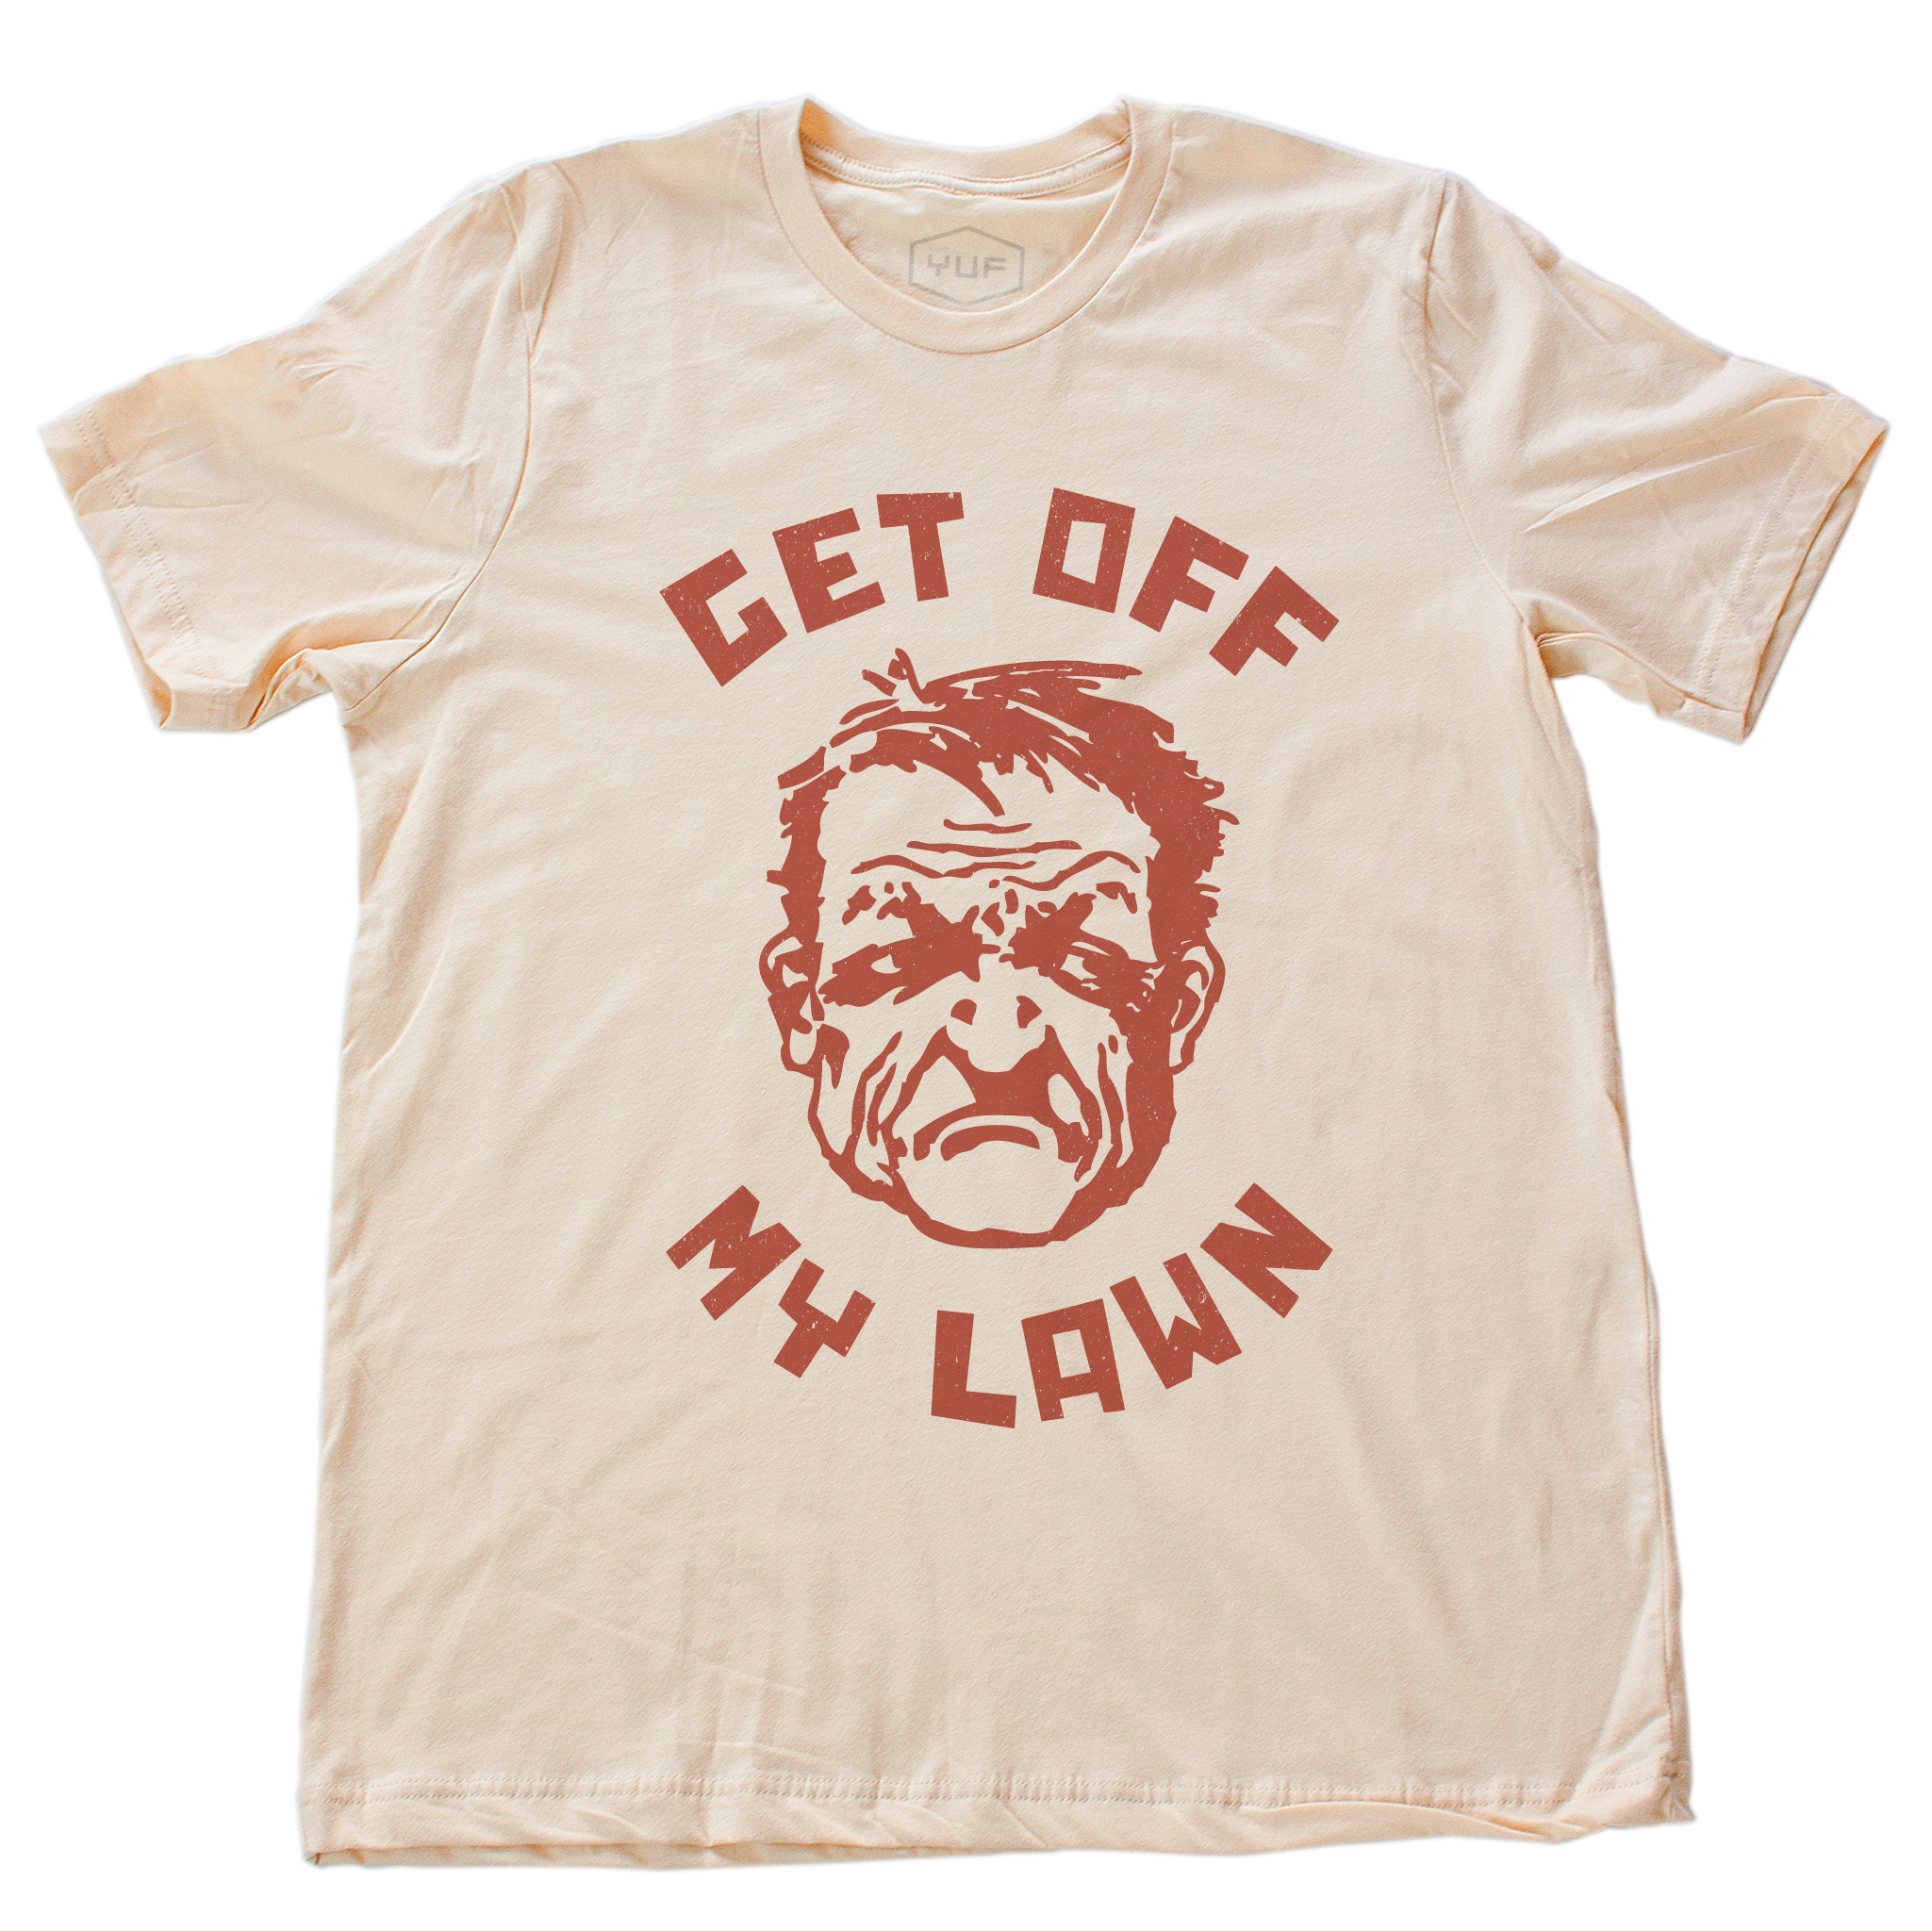 A sarcastic t-shirt in Soft Cream, inspired by the “Get Off My Lawn” meme, featuring a cartoonish angry man and bold typography. From fashion brand YUF, available at wolfsaint.net